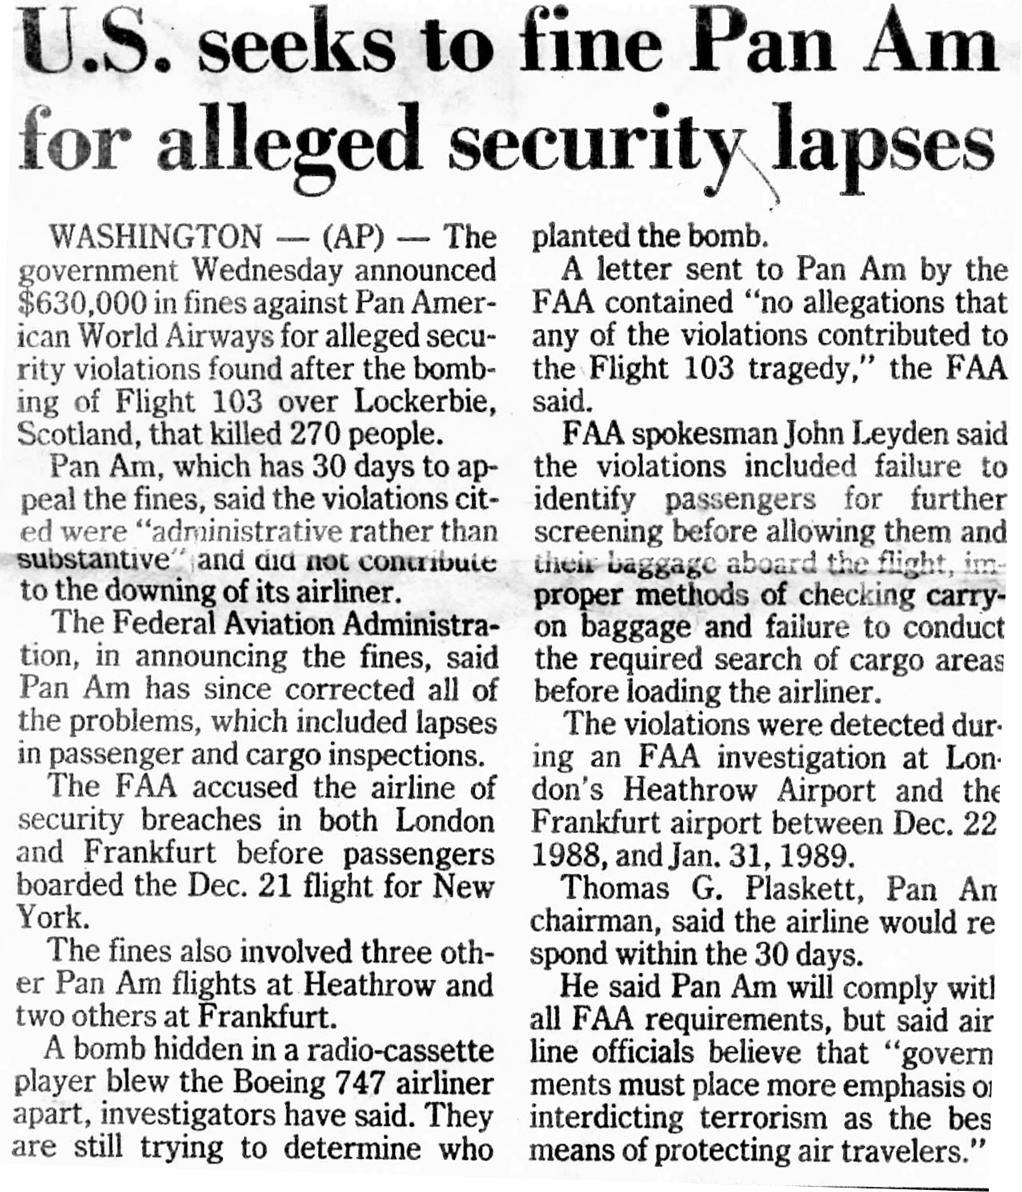 miami-herald-us-seeks-to-fine-pan-am-for-alleged-security-lapses.jpg